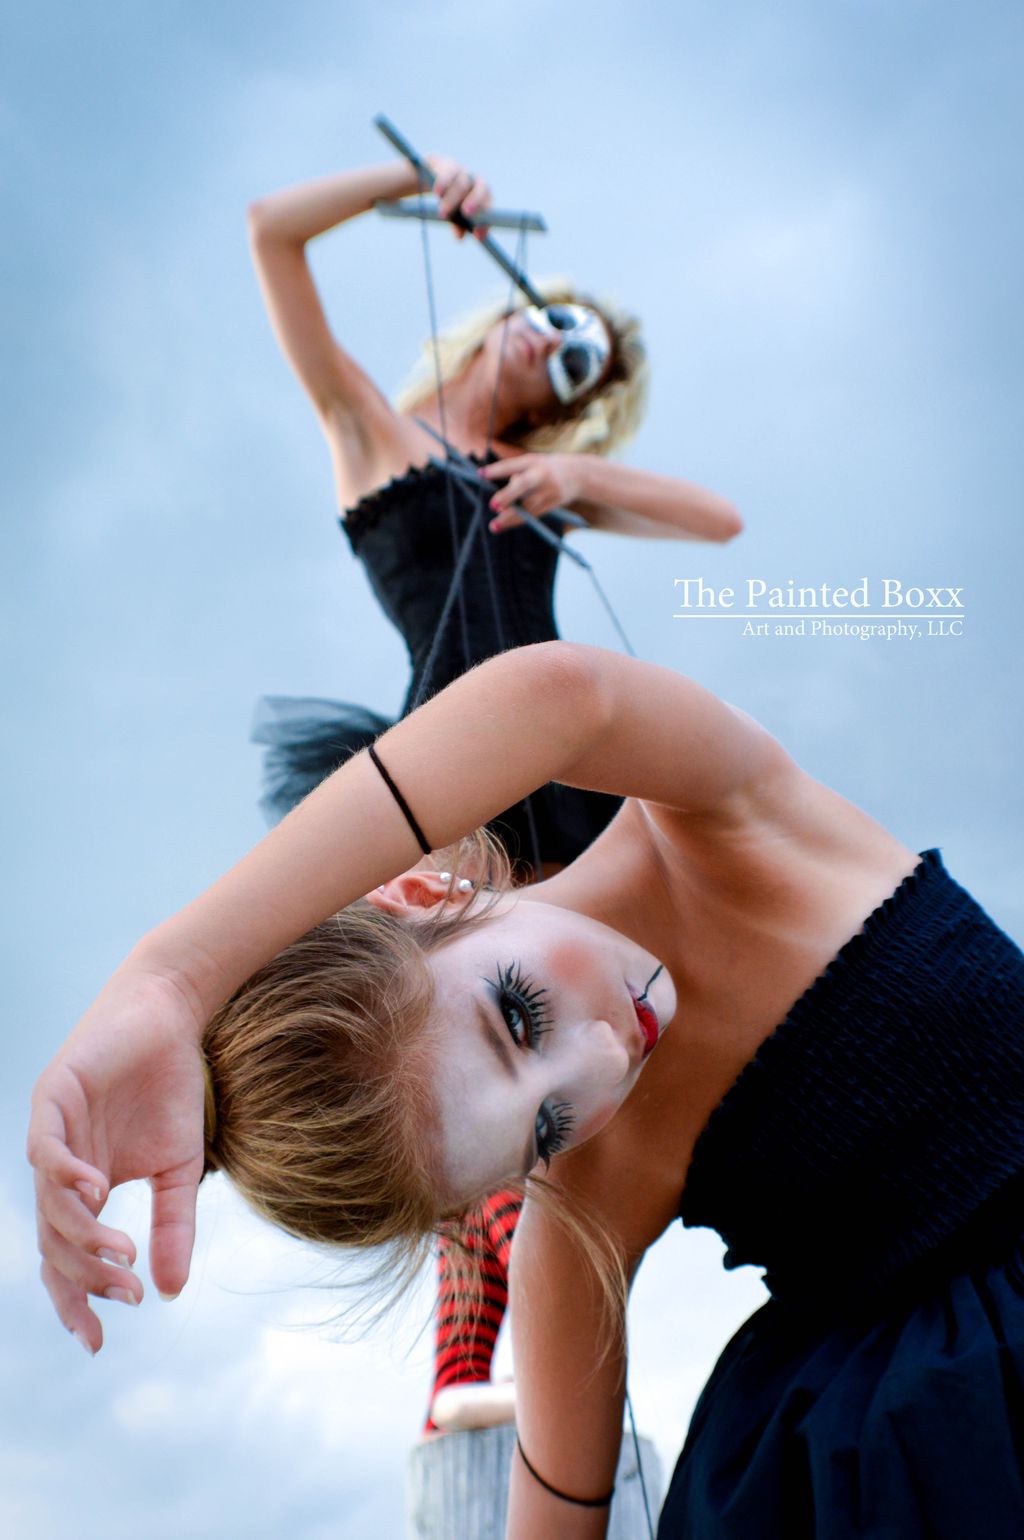 The Painted Boxx Art and Photography